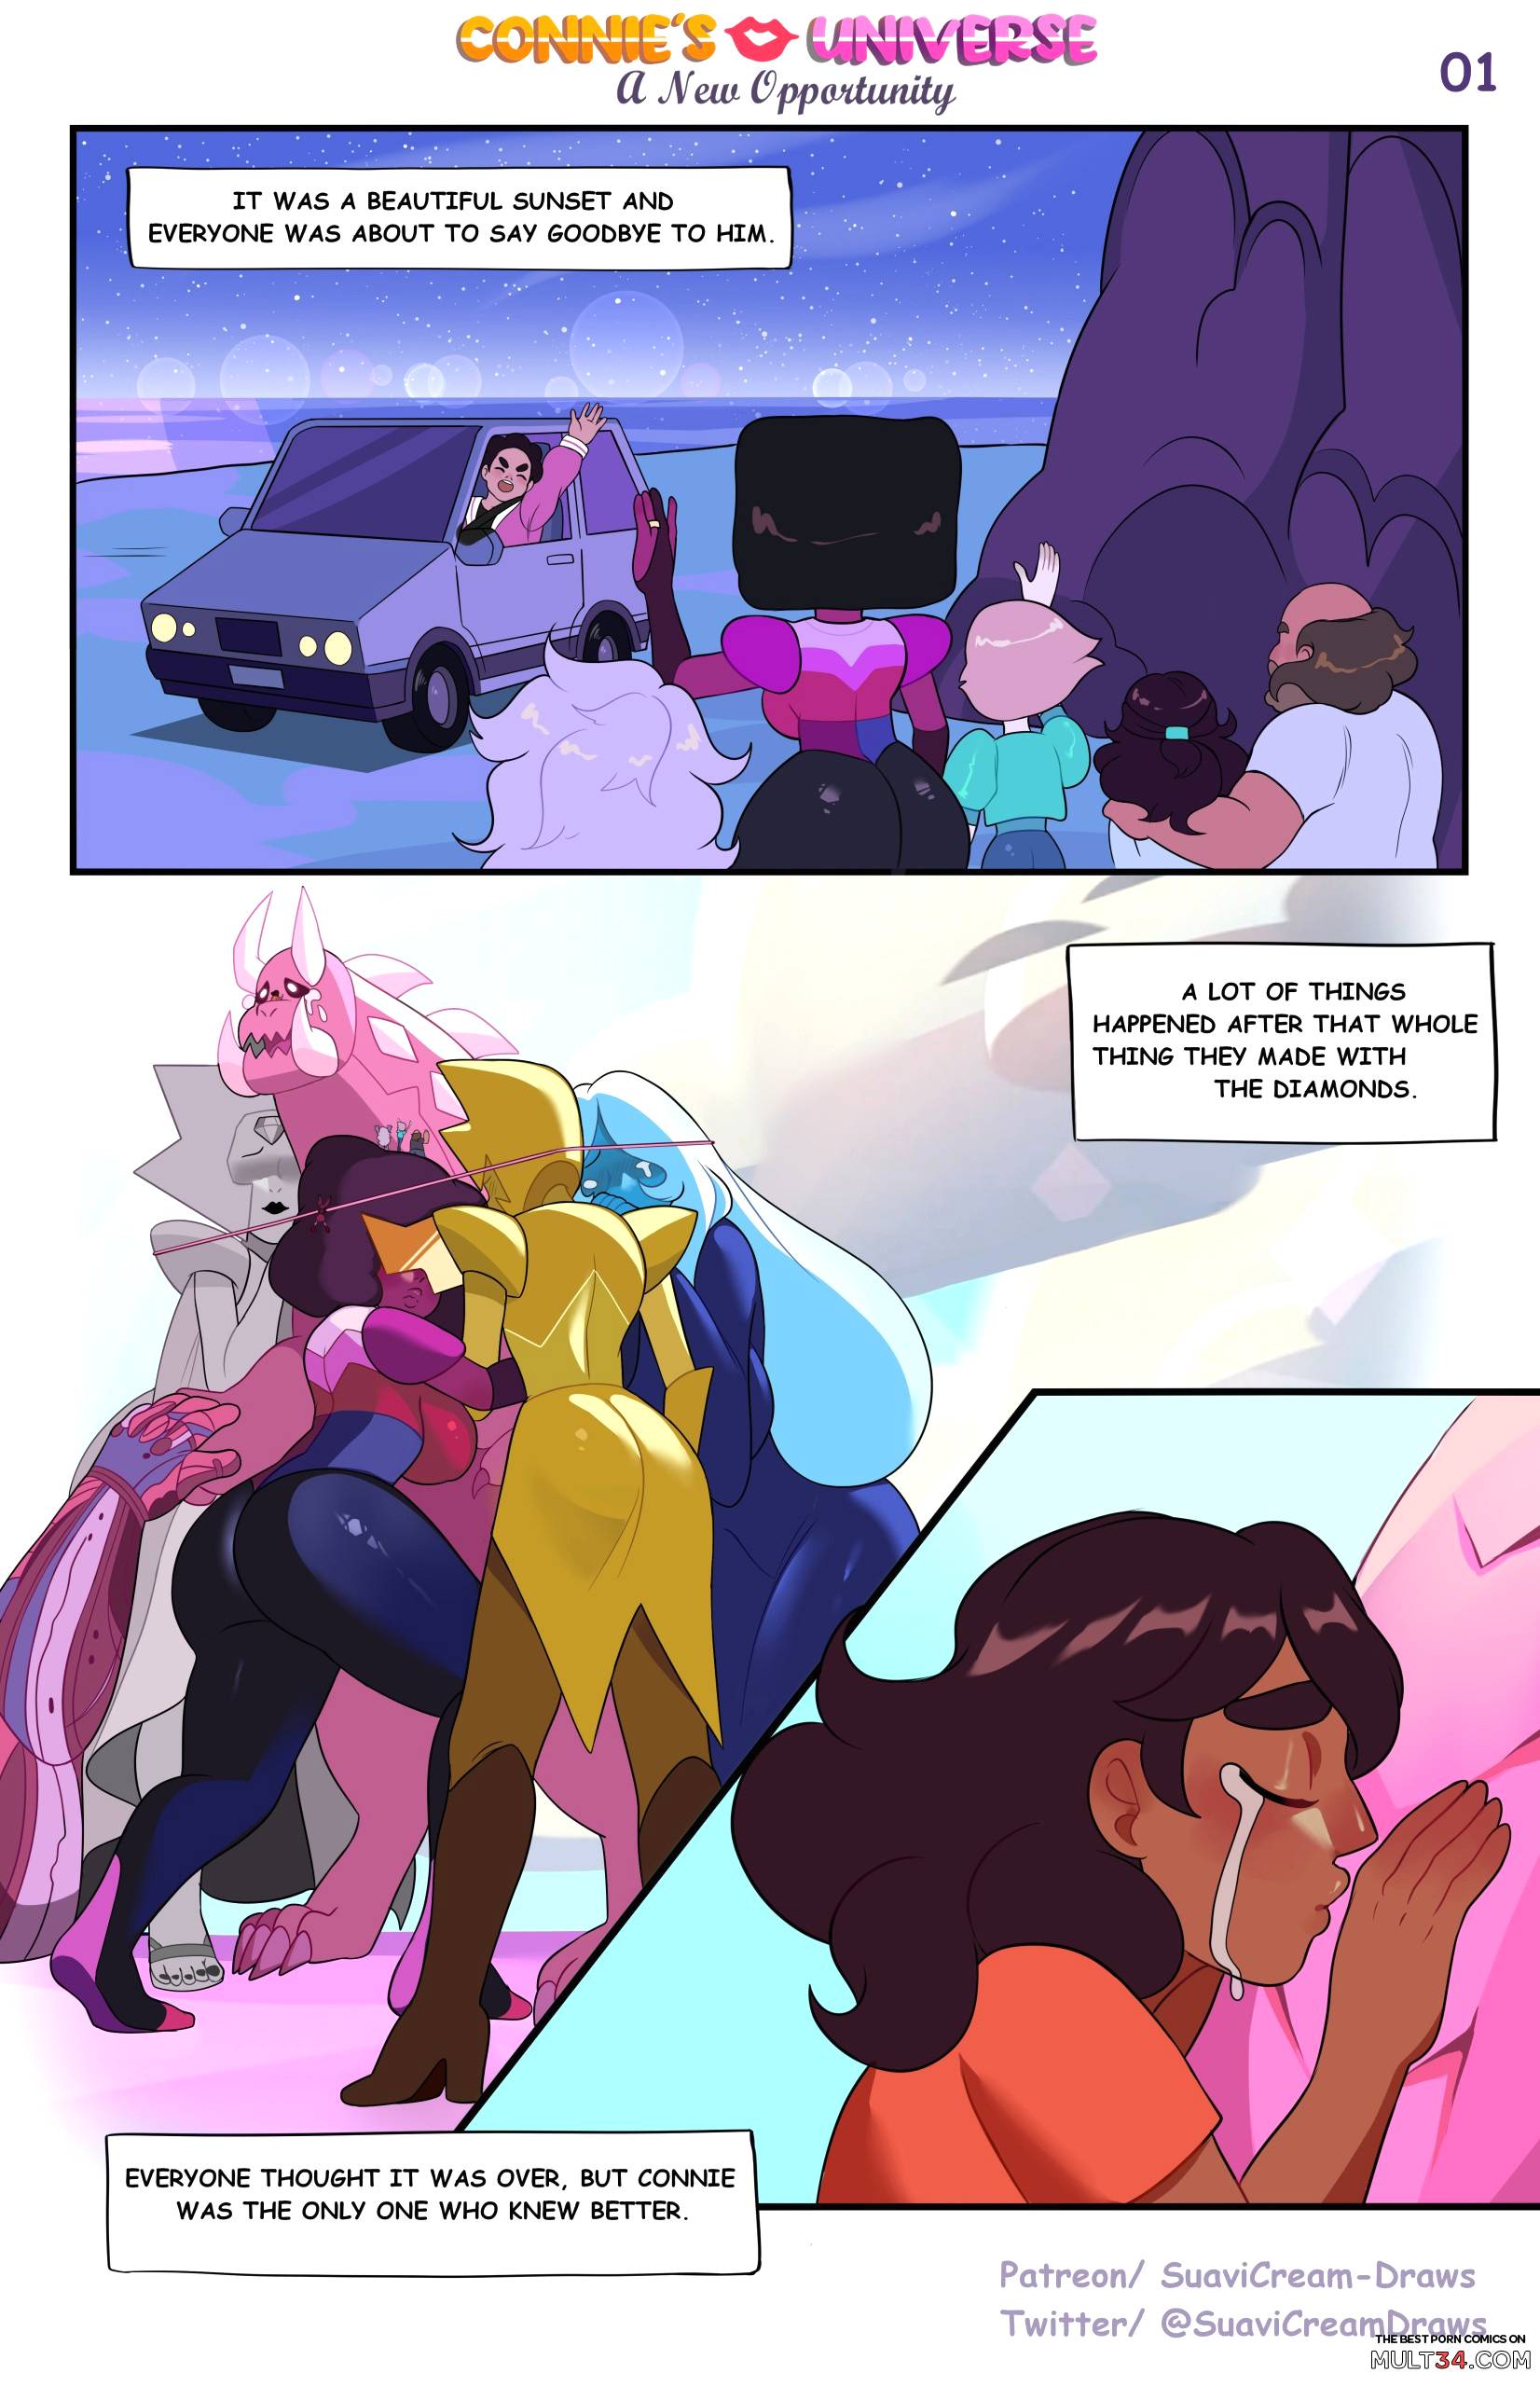 Connie's universe - A new opportunity page 2